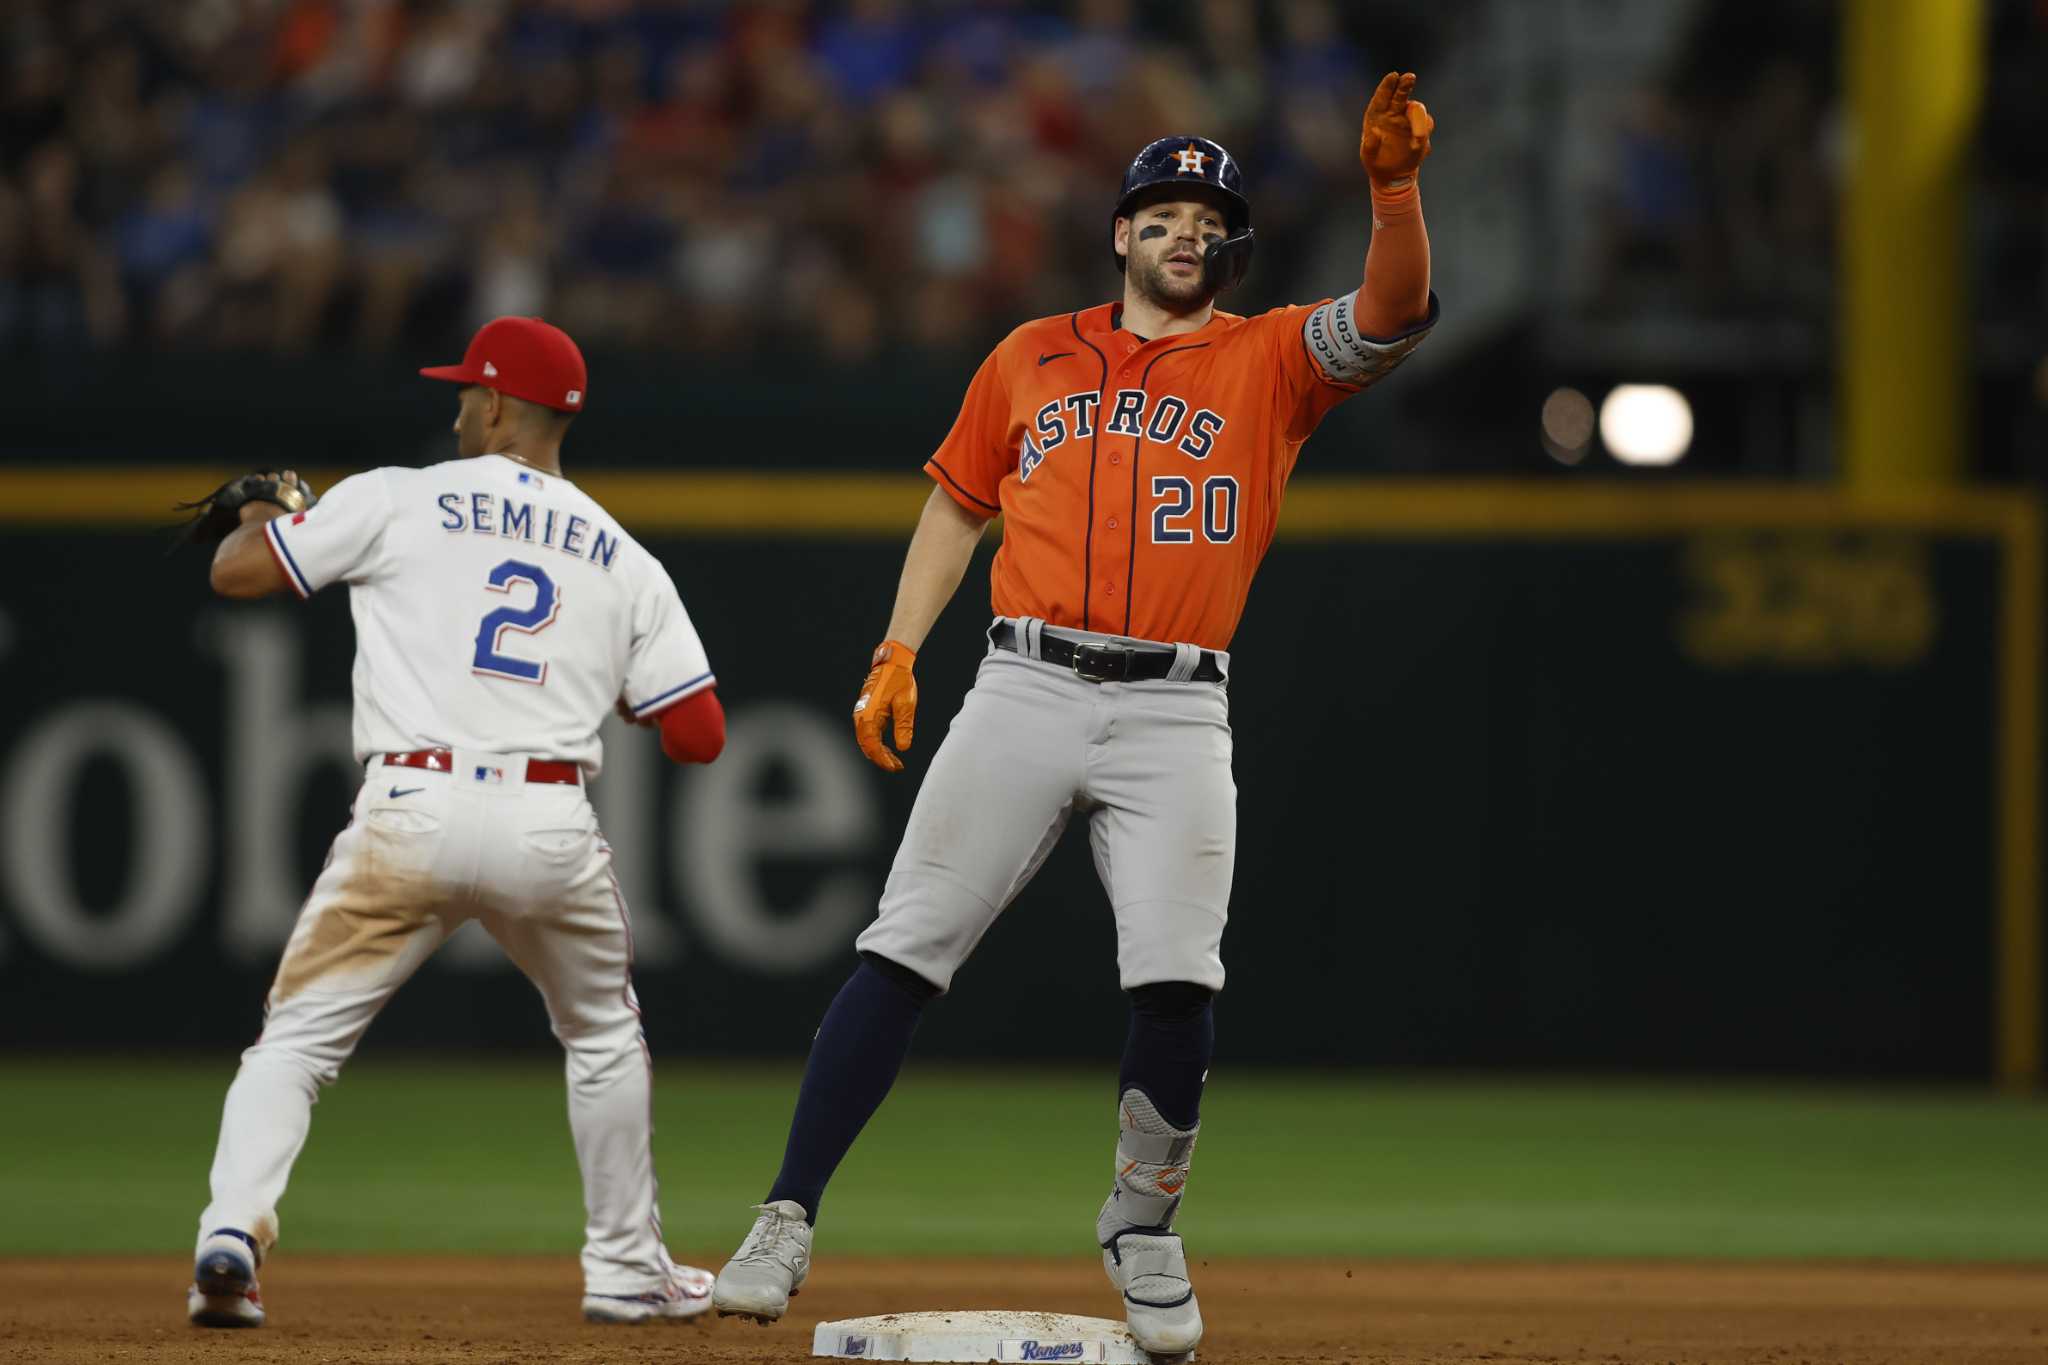 Social media reacts to the Texas Rangers game 1 win over the Houston Astros  in the ALCS